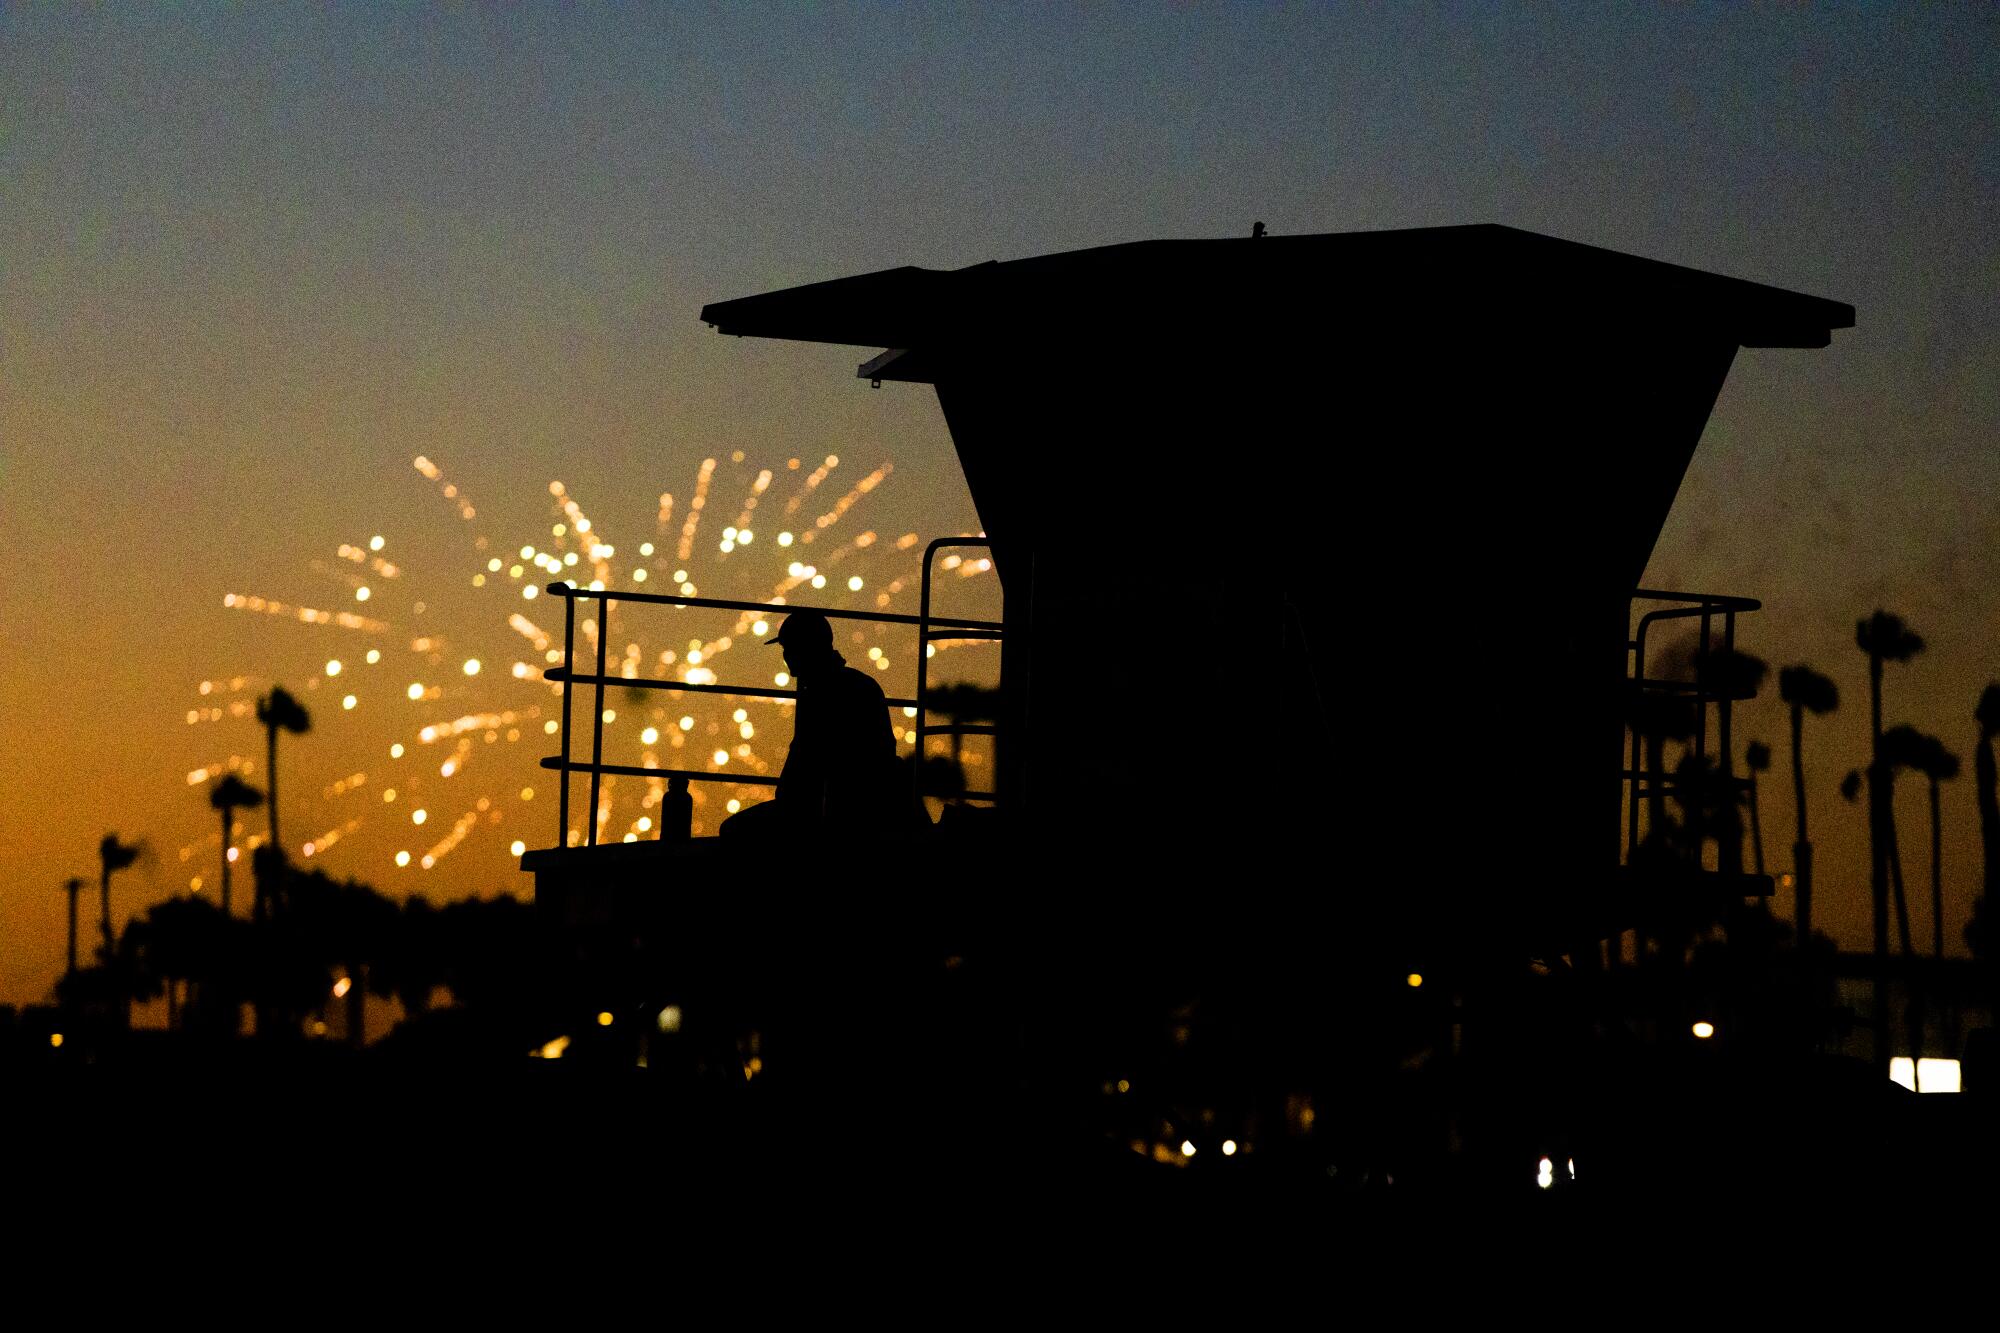 A silhouette of a person and lifeguard tower with orange sparks from fireworks against an evening sky 